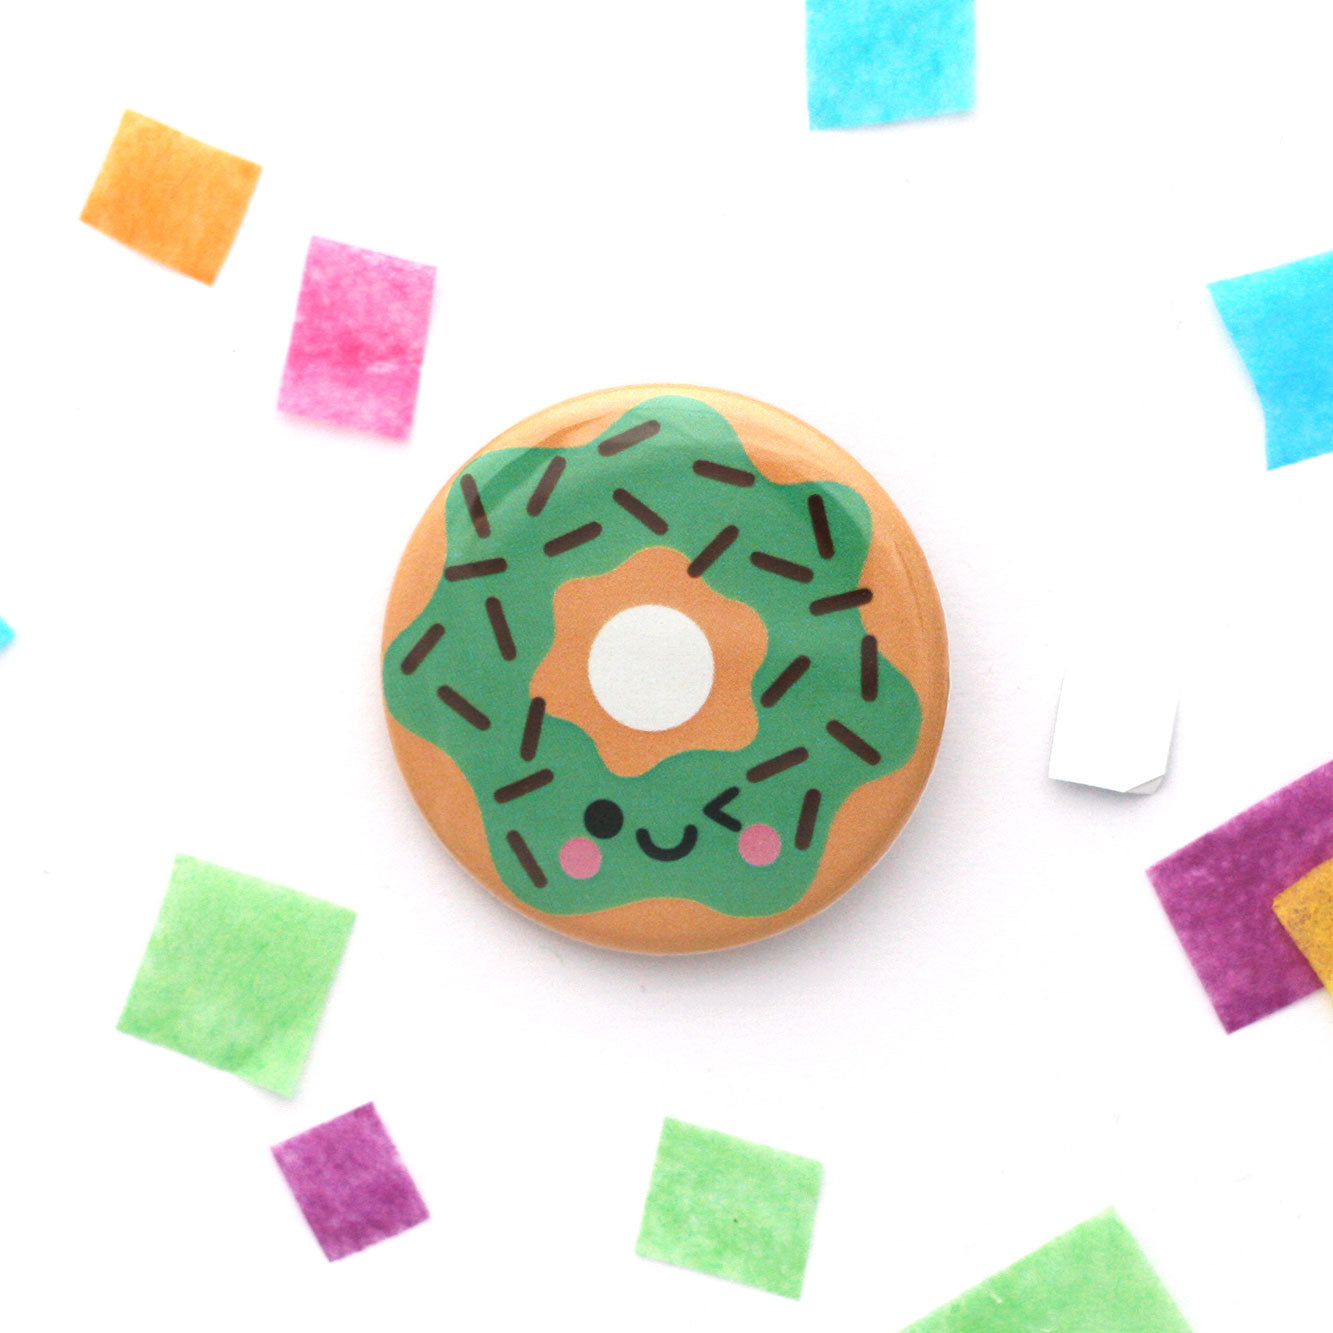 Mint choc chip donut 38mm button badge with winking face